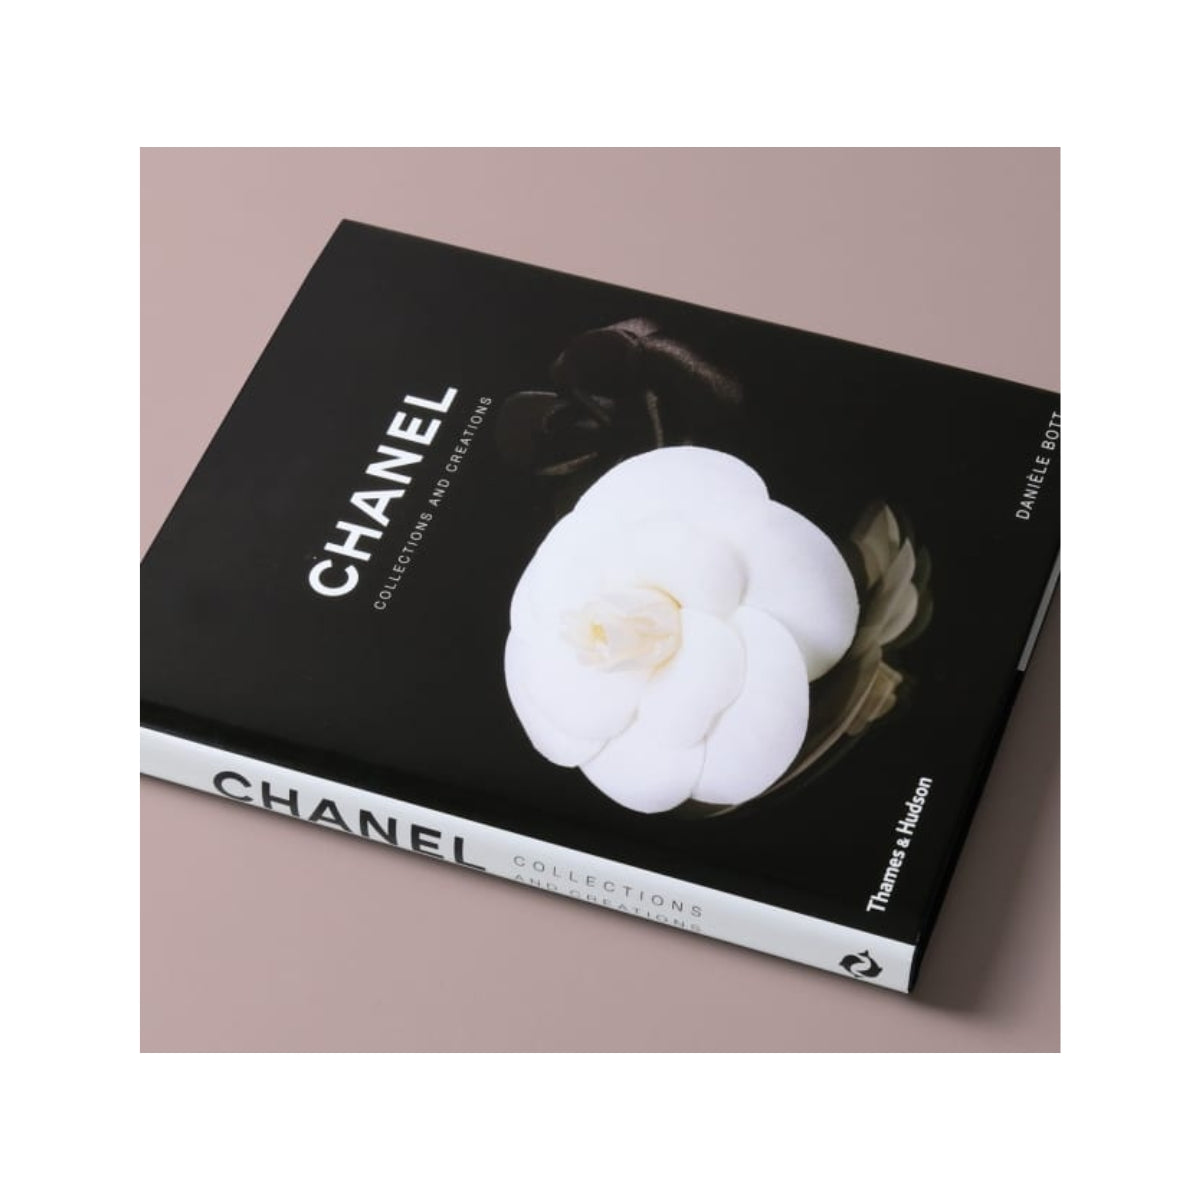 New Mags | CHANEL: Collections and Creations - Bolighuset Werenberg